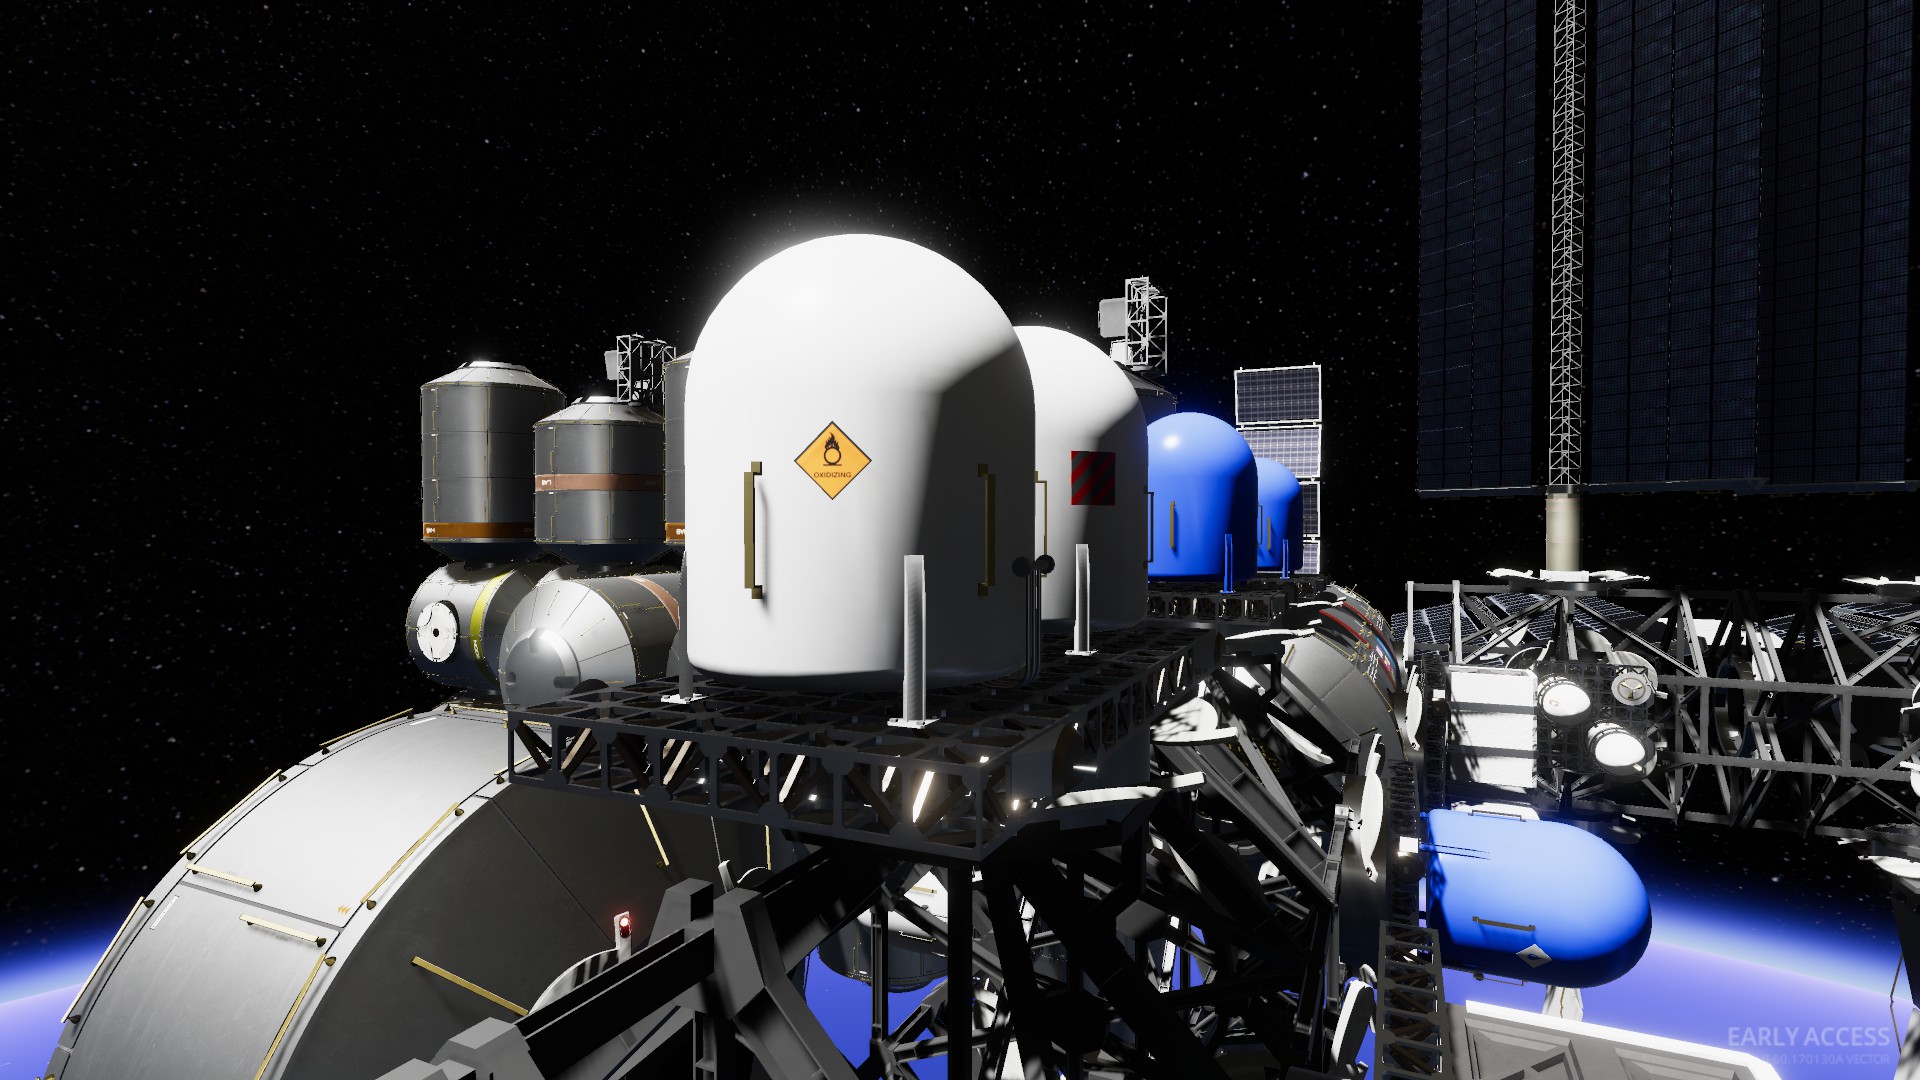 Stable Orbit - Build your own space station screenshot